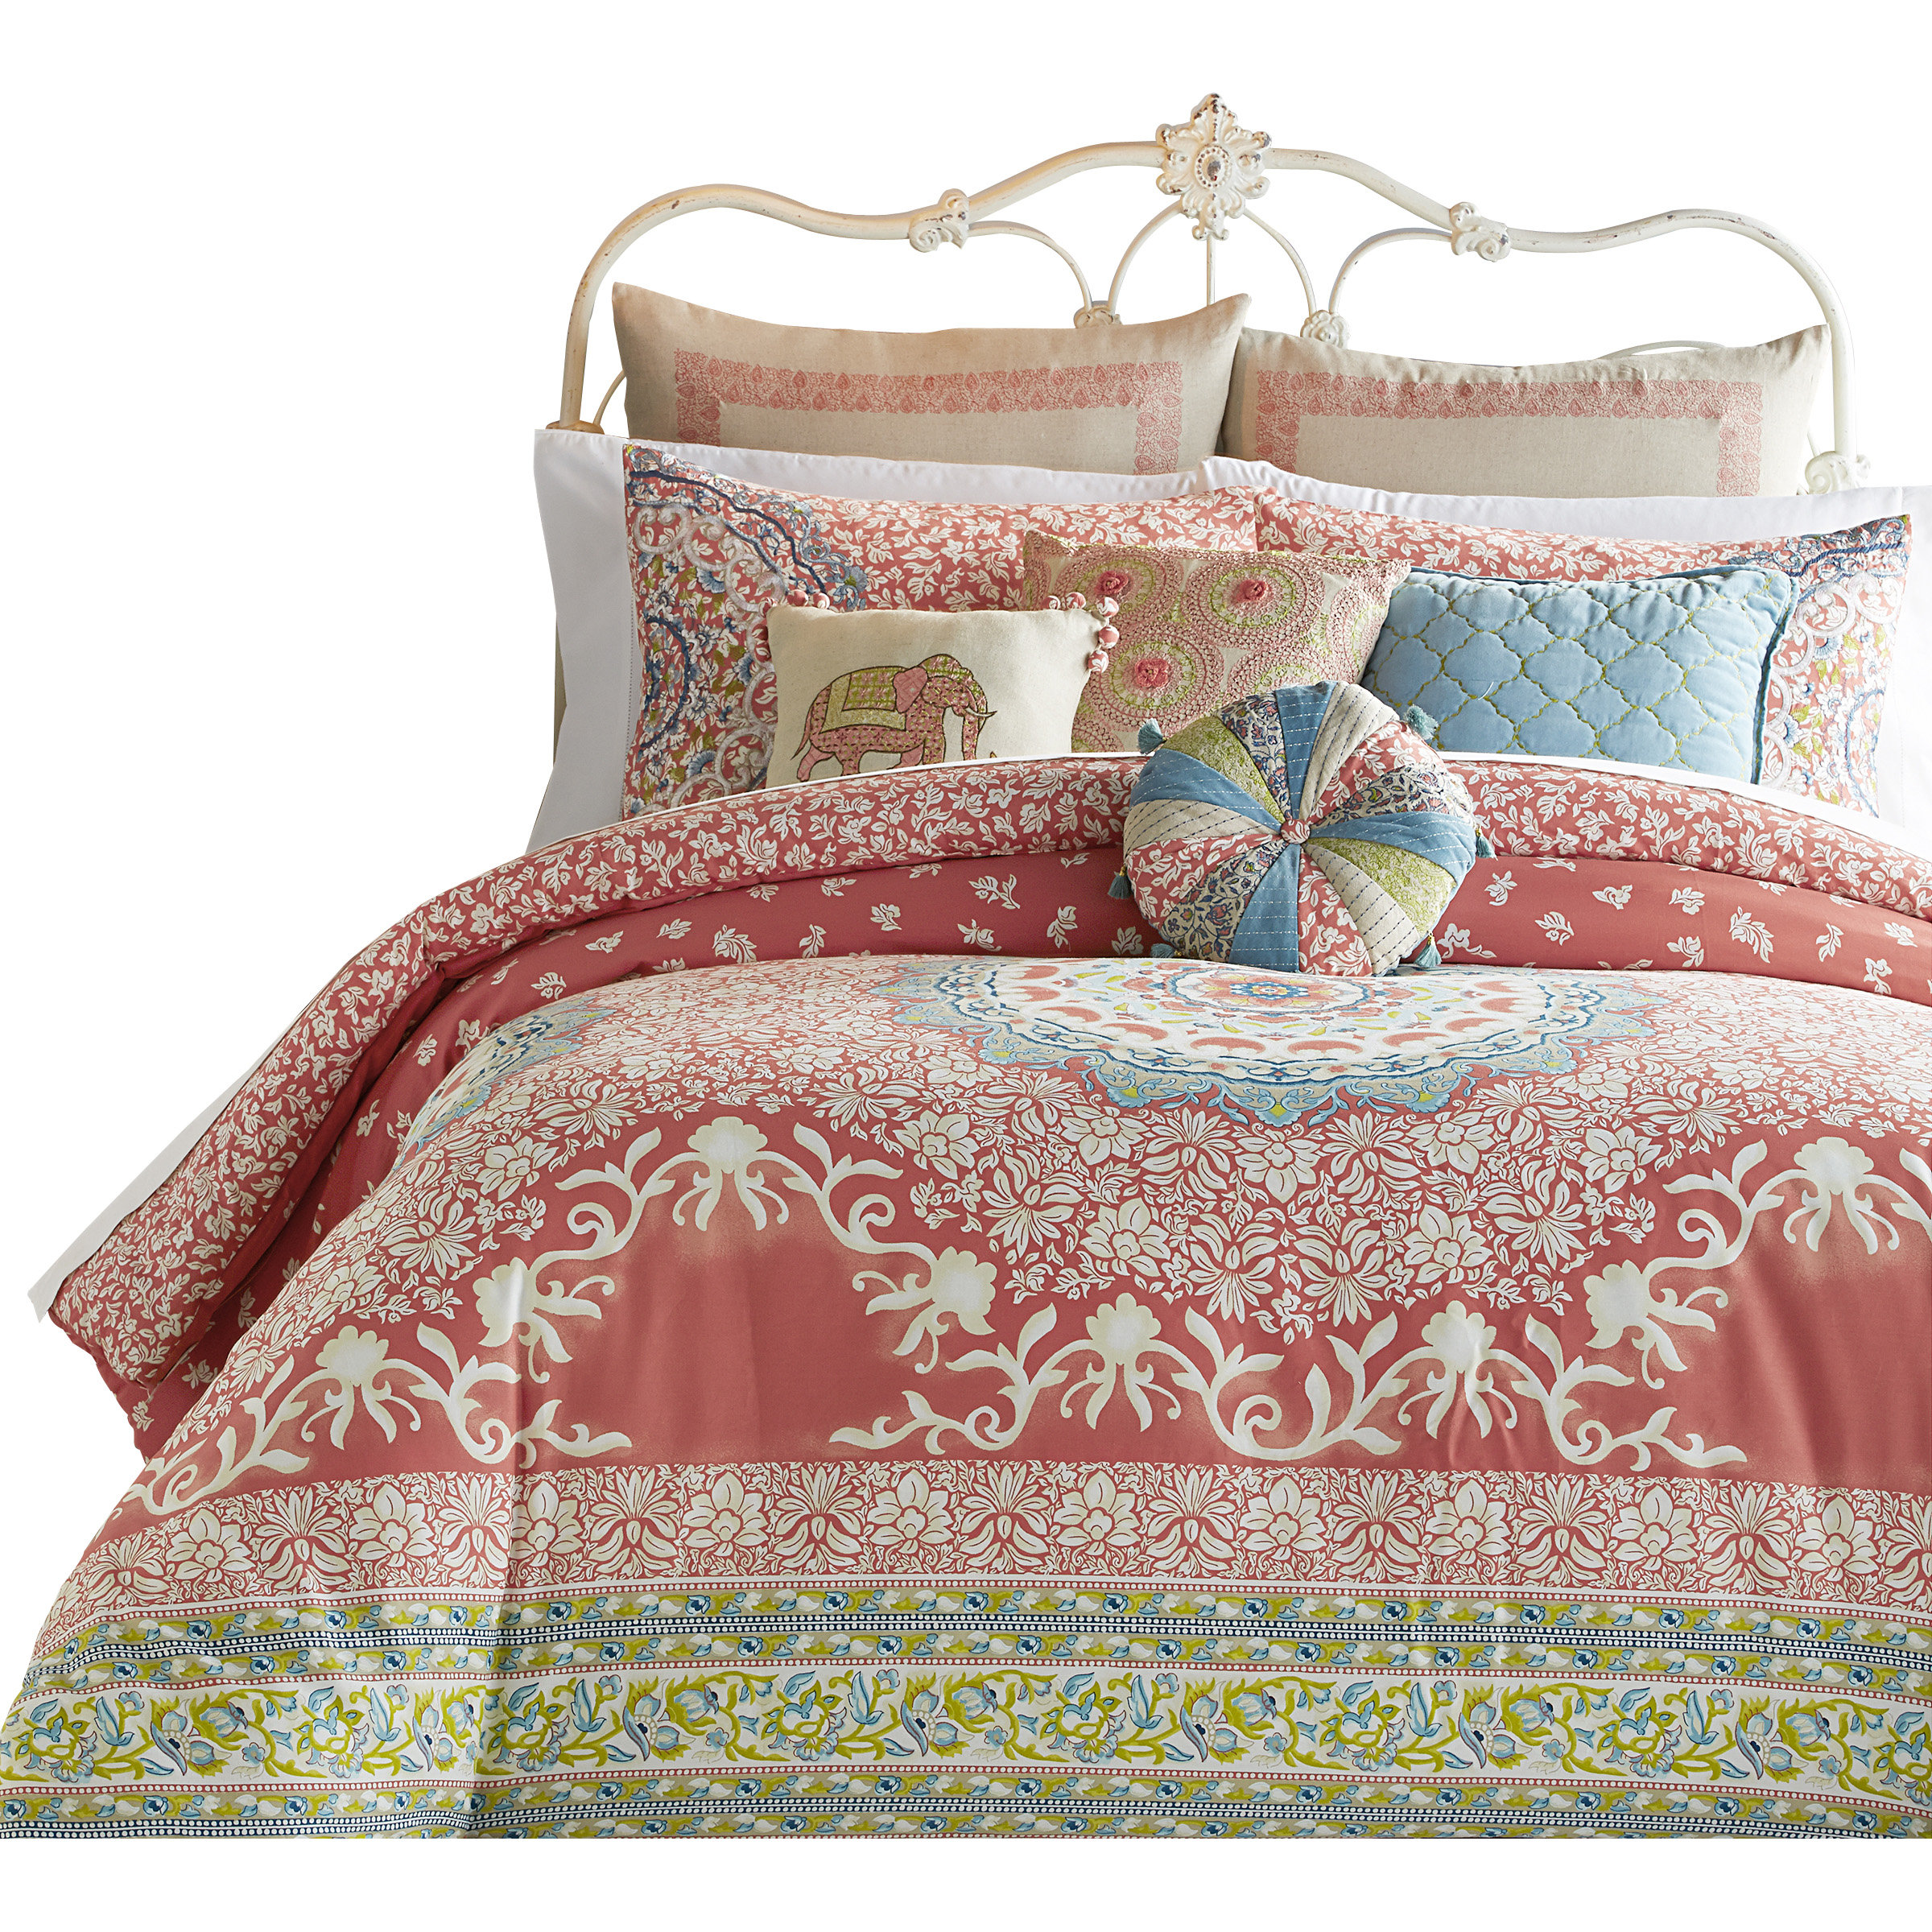 more than one Comforter for Sale by JessicaDelgad